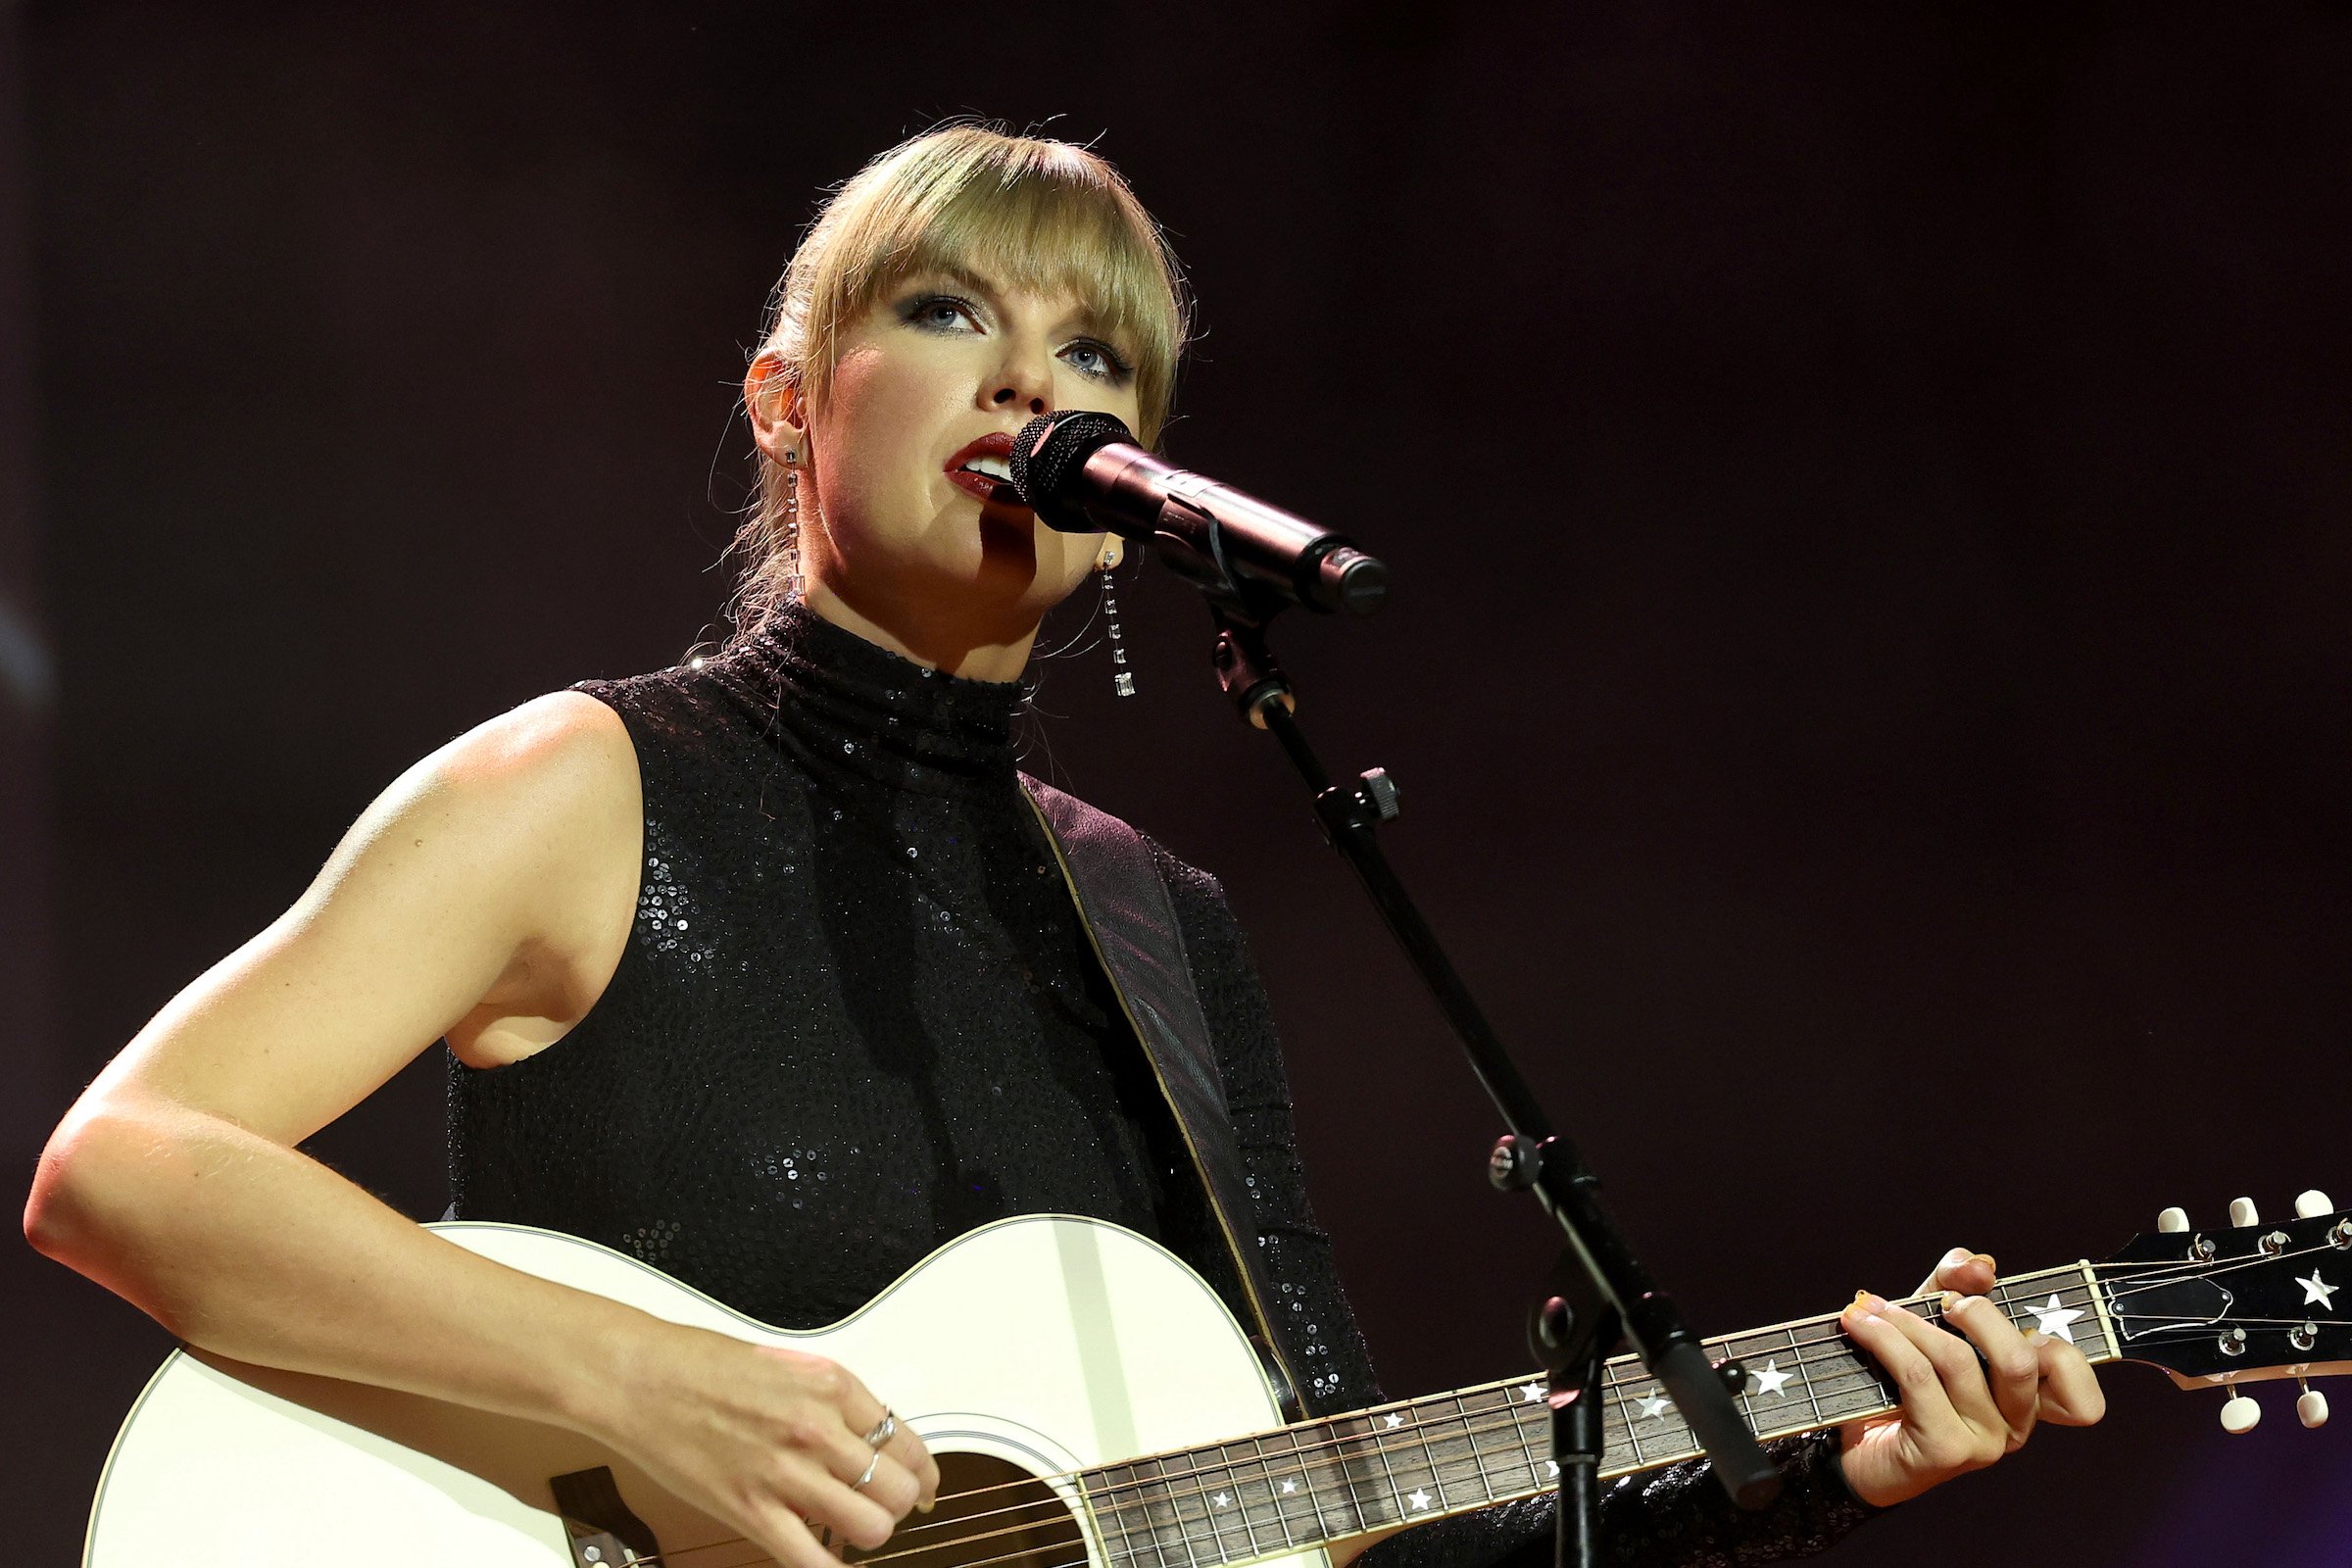 Taylor Swift, who turned down performing at the Super Bowl, wearing black and playing a white guitar